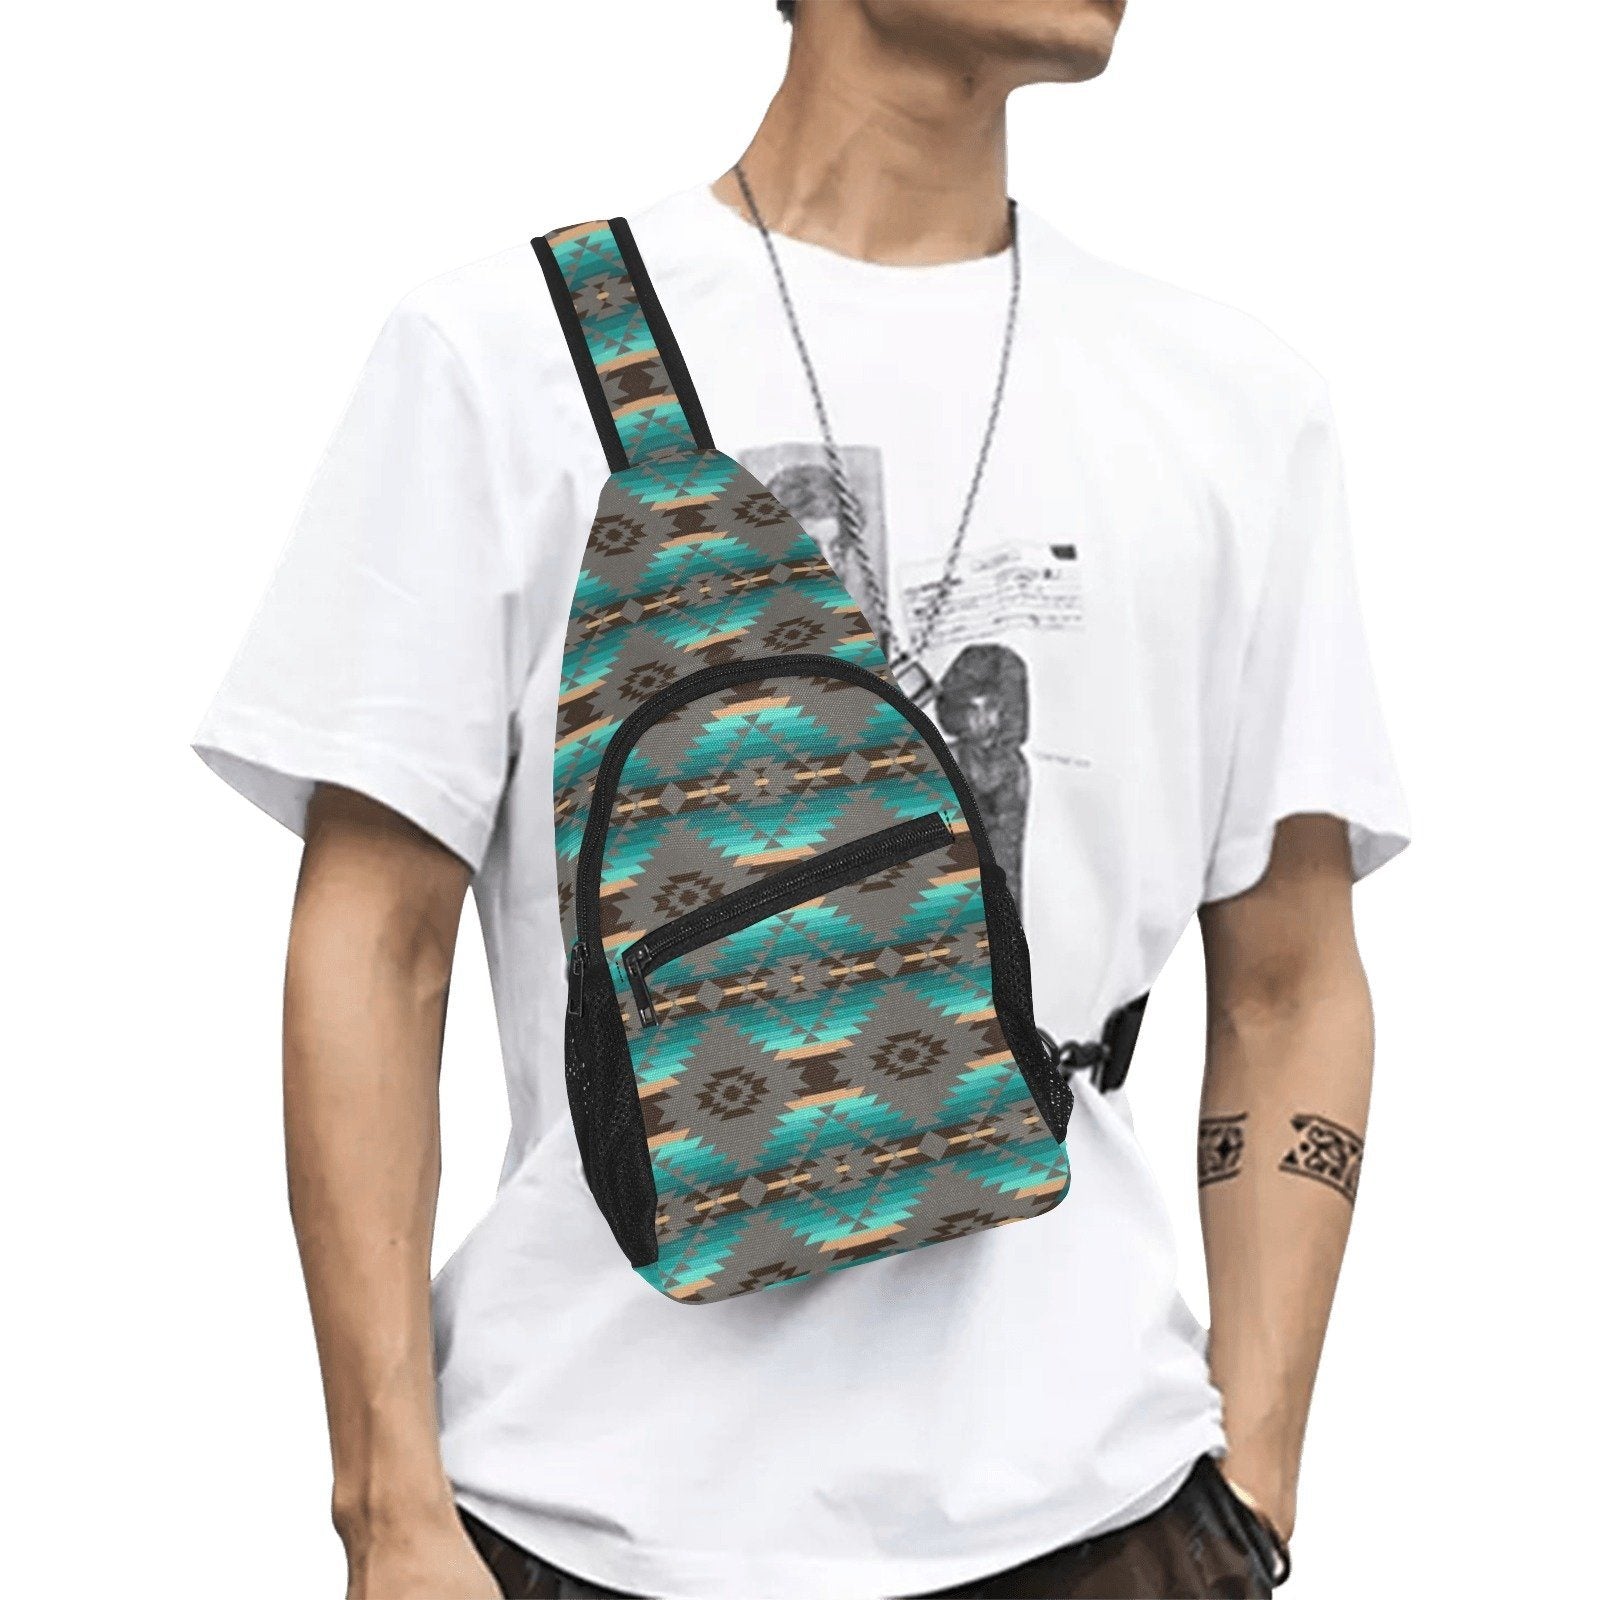 Cree Confederacy All Over Print Chest Bag (Model 1719) All Over Print Chest Bag (1719) e-joyer 